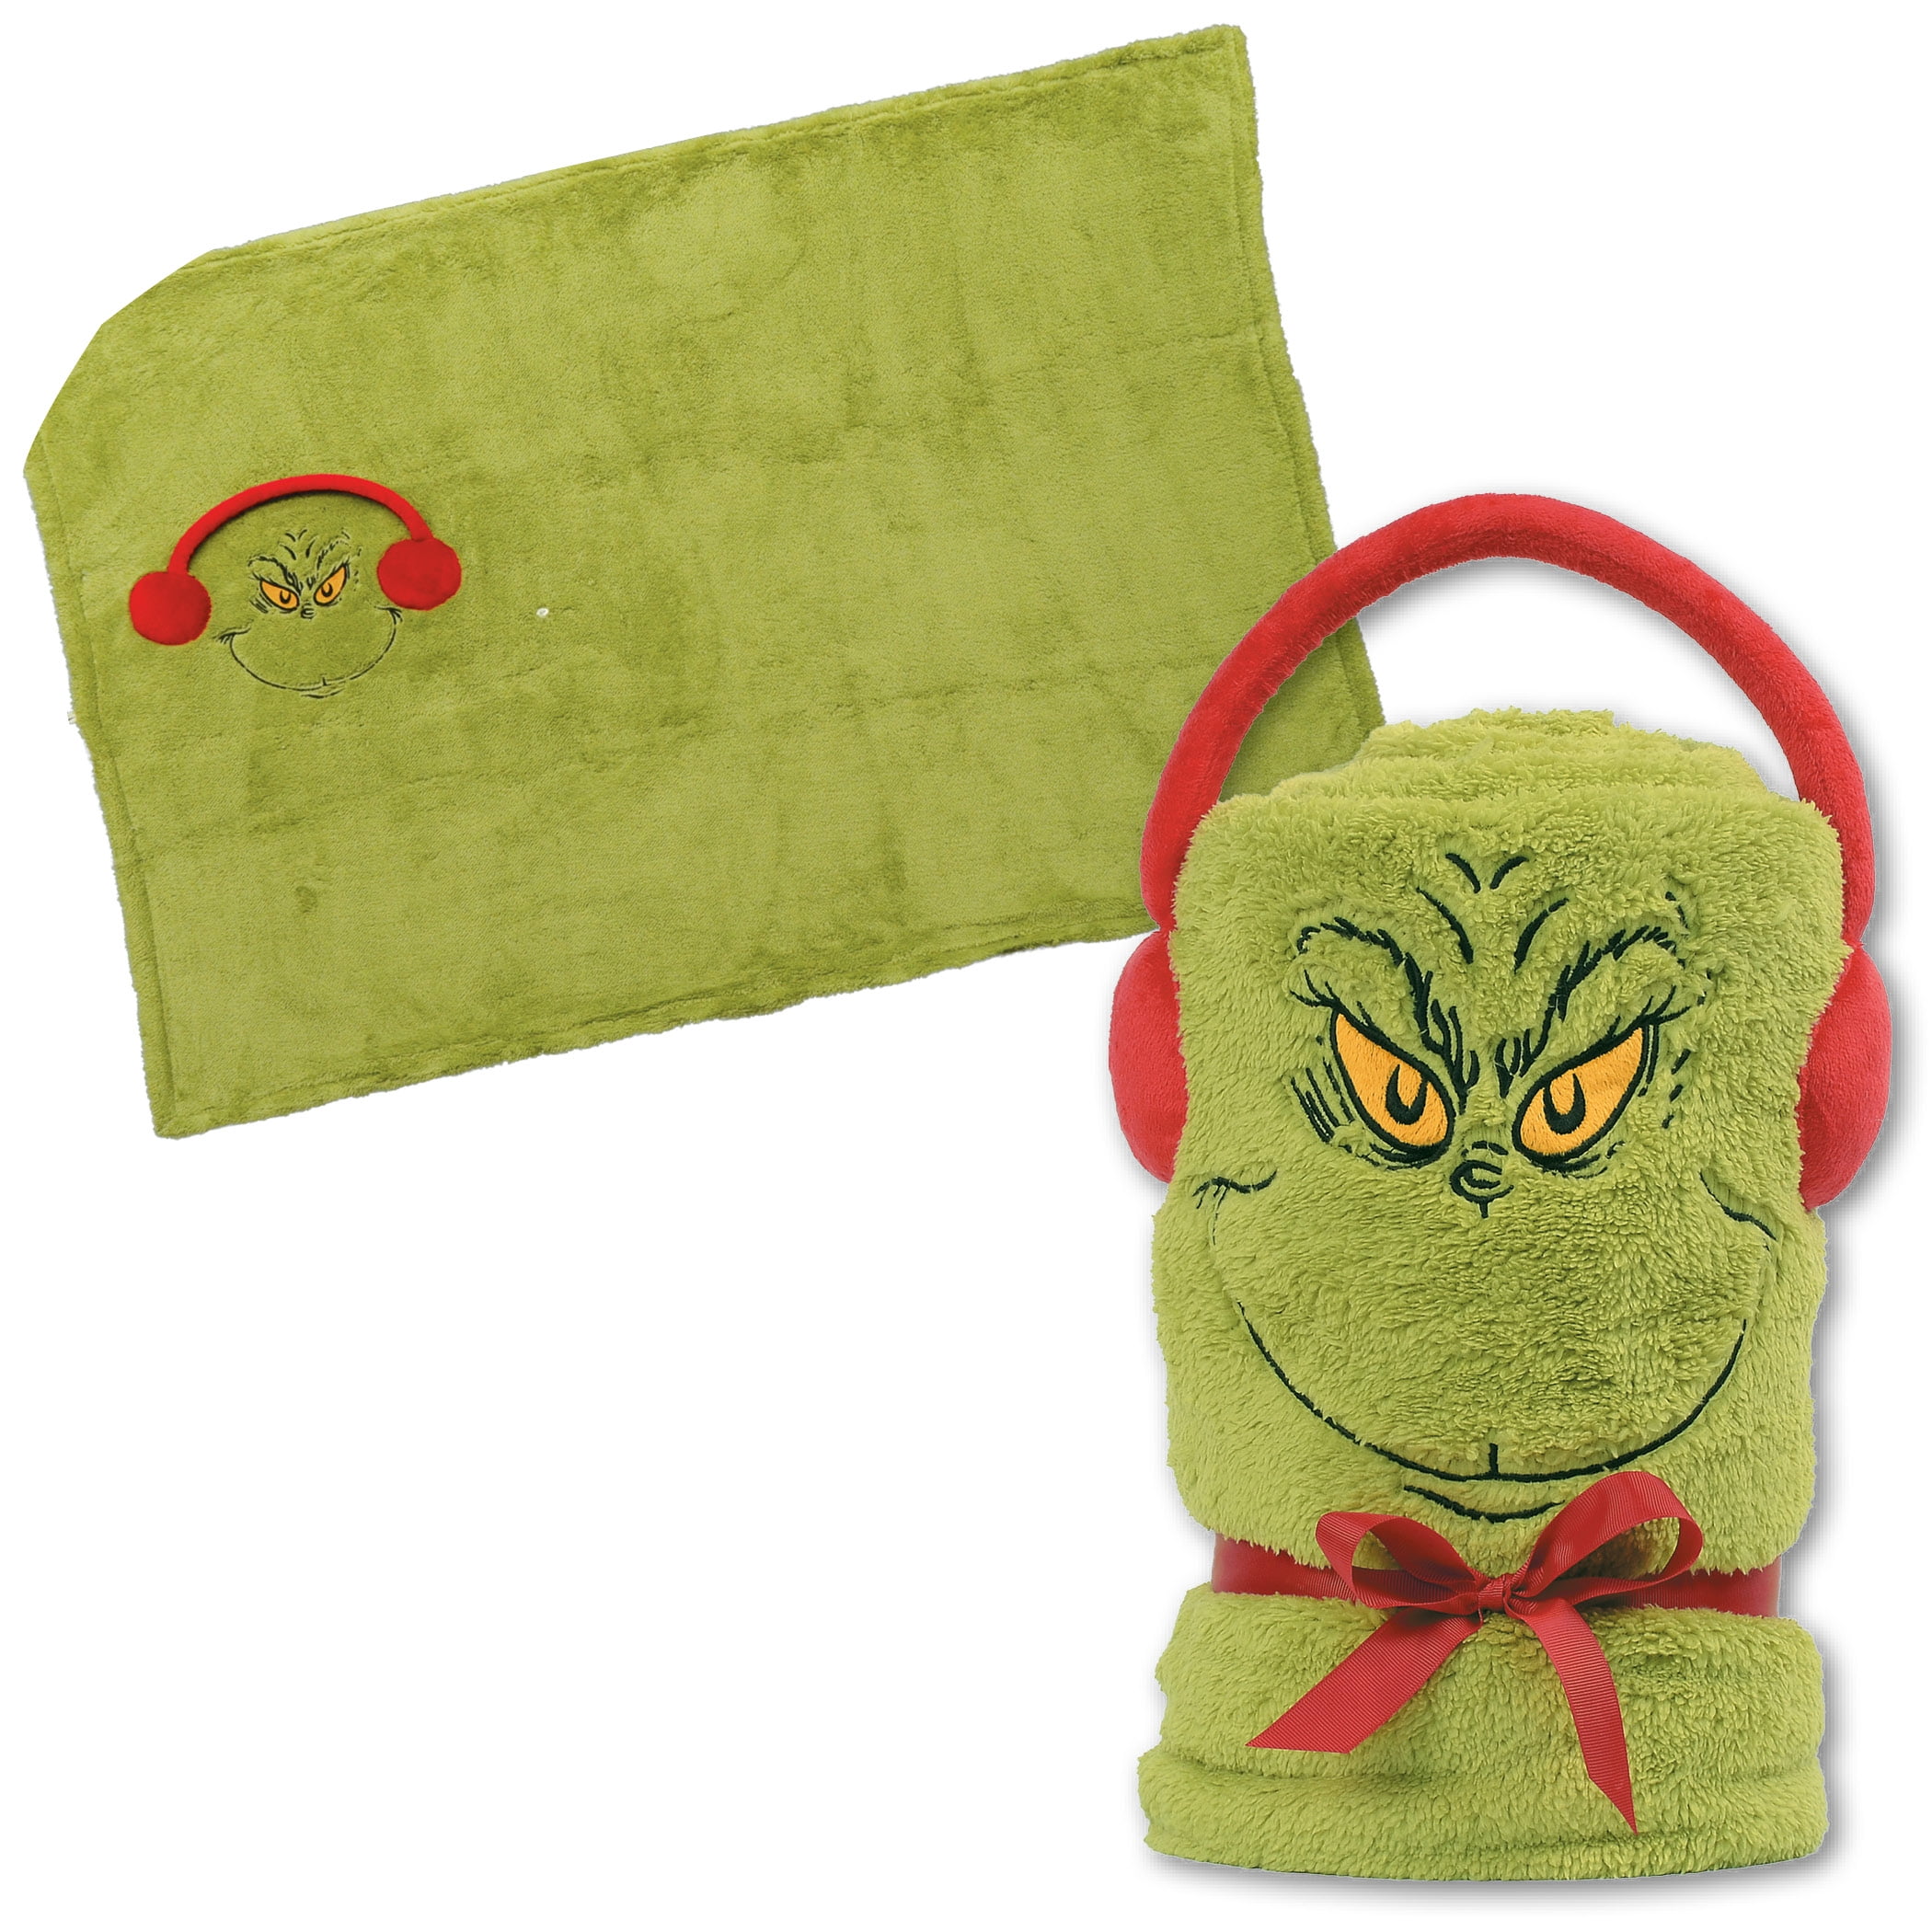 Ultra Soft How The Grinch Stole Christmas Green 3D Blanket Quilt Microfiber Plush Sherpa Throw Blankets for Kids and Adults Fleece Bedding Green-05, 59'' x 79''